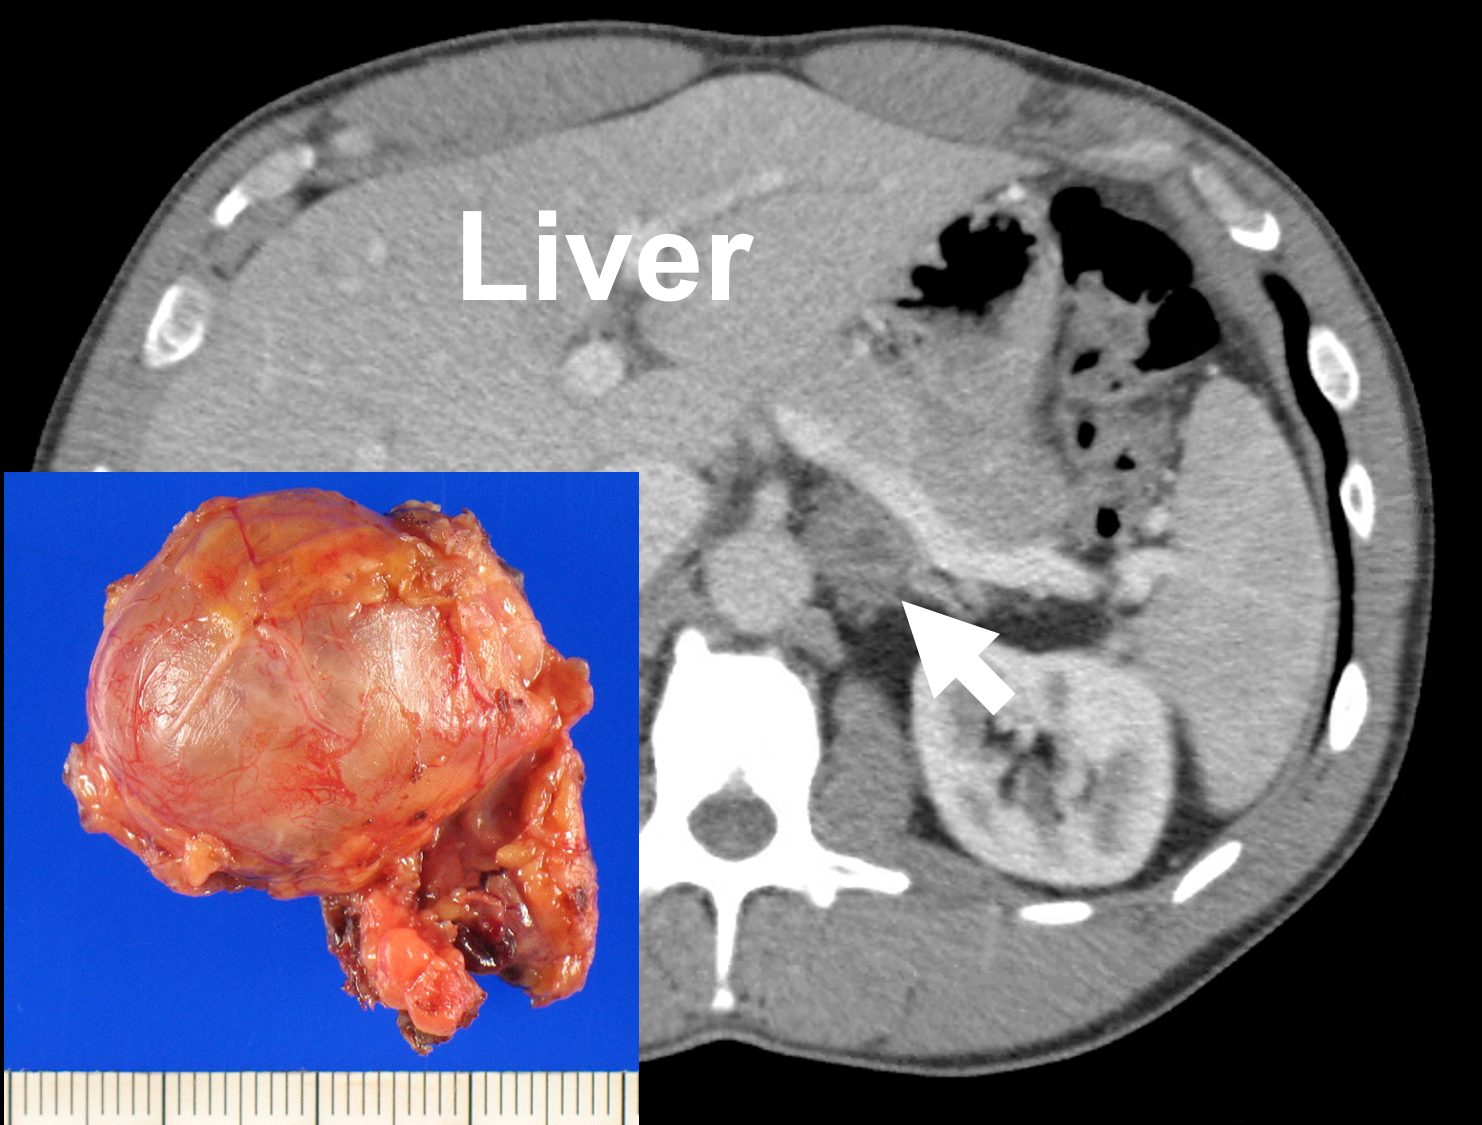 CT scan and gross pathology of a ganglioneuroma (4.3 cm; arrow). This is a rare retroperitoneal tumor, which arise adjacent to the adrenal gland. Similar as an adrenalectomy, it can be removed via a Mini Back Scope approach.